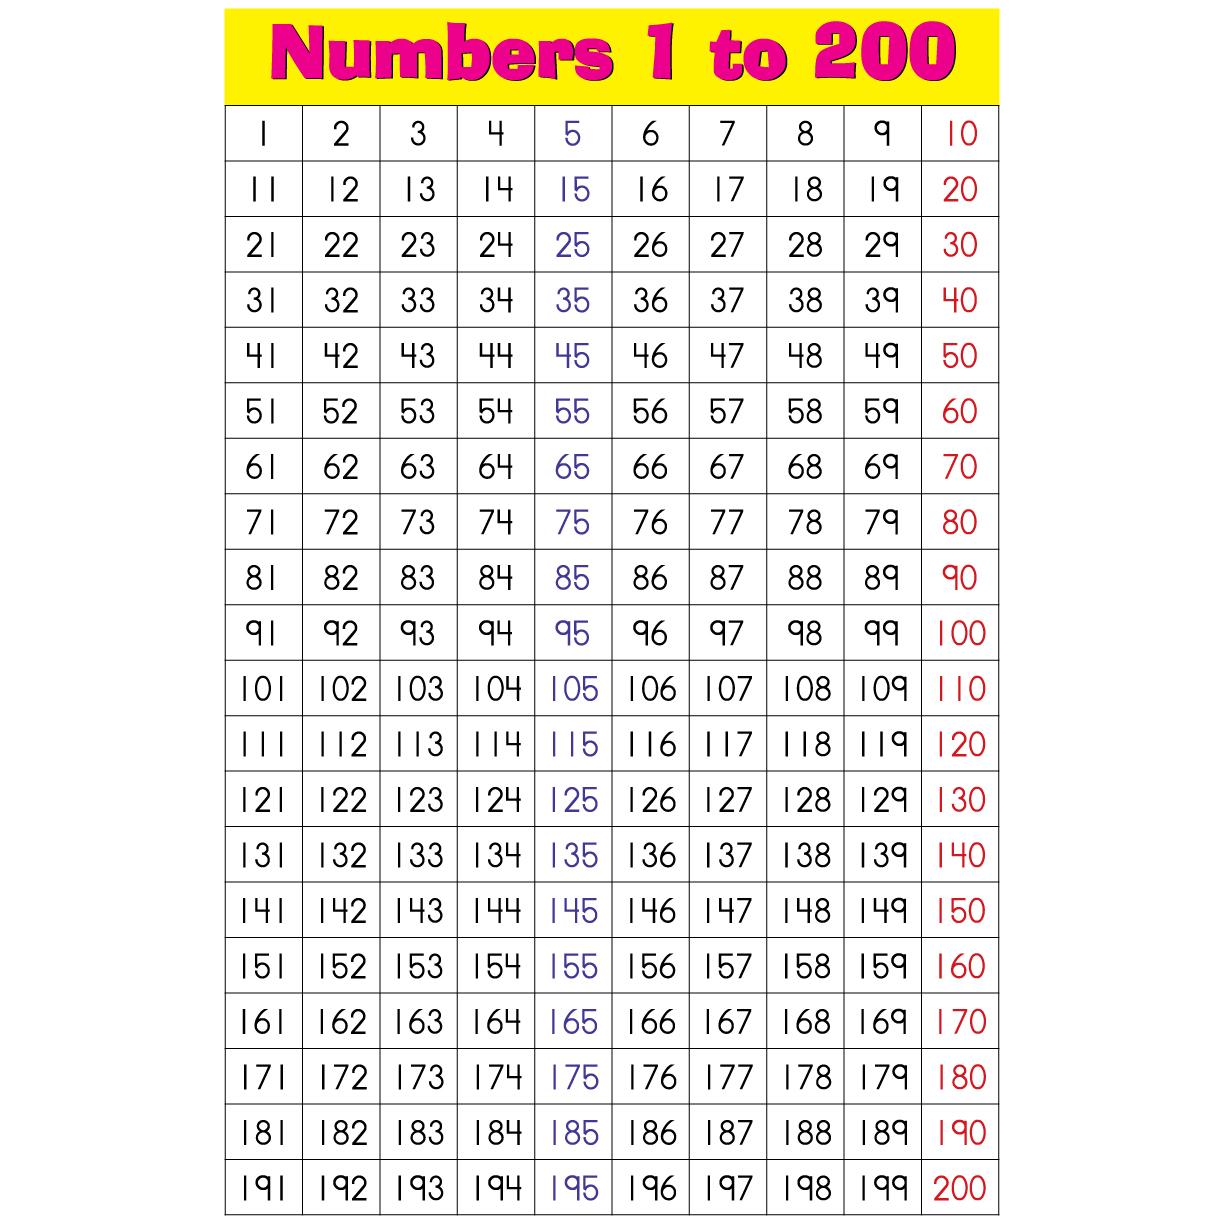 numbers-1-200-educational-laminated-chart